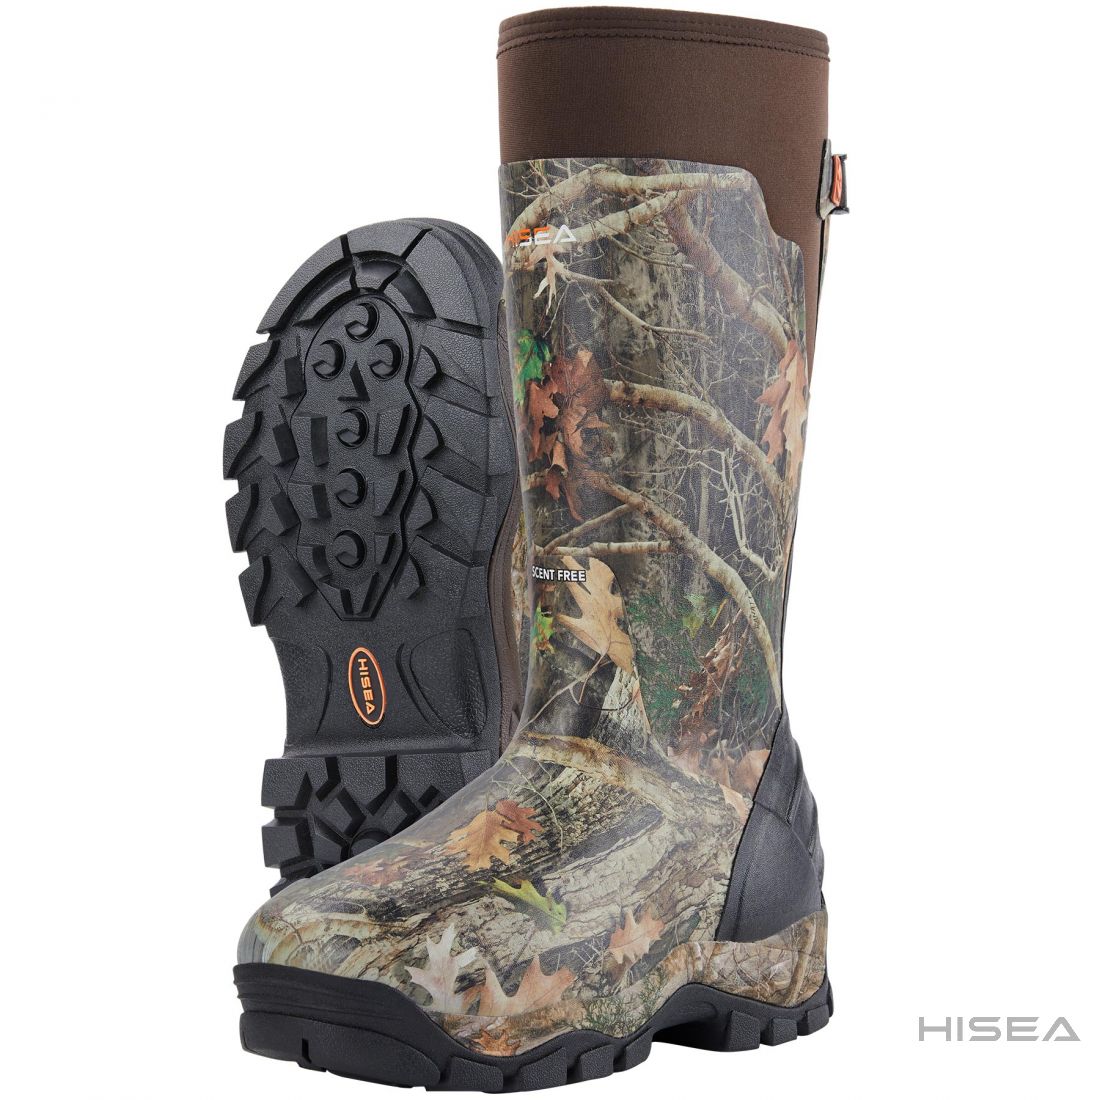 Apollo Pro 800G Insulated Hunting Boots